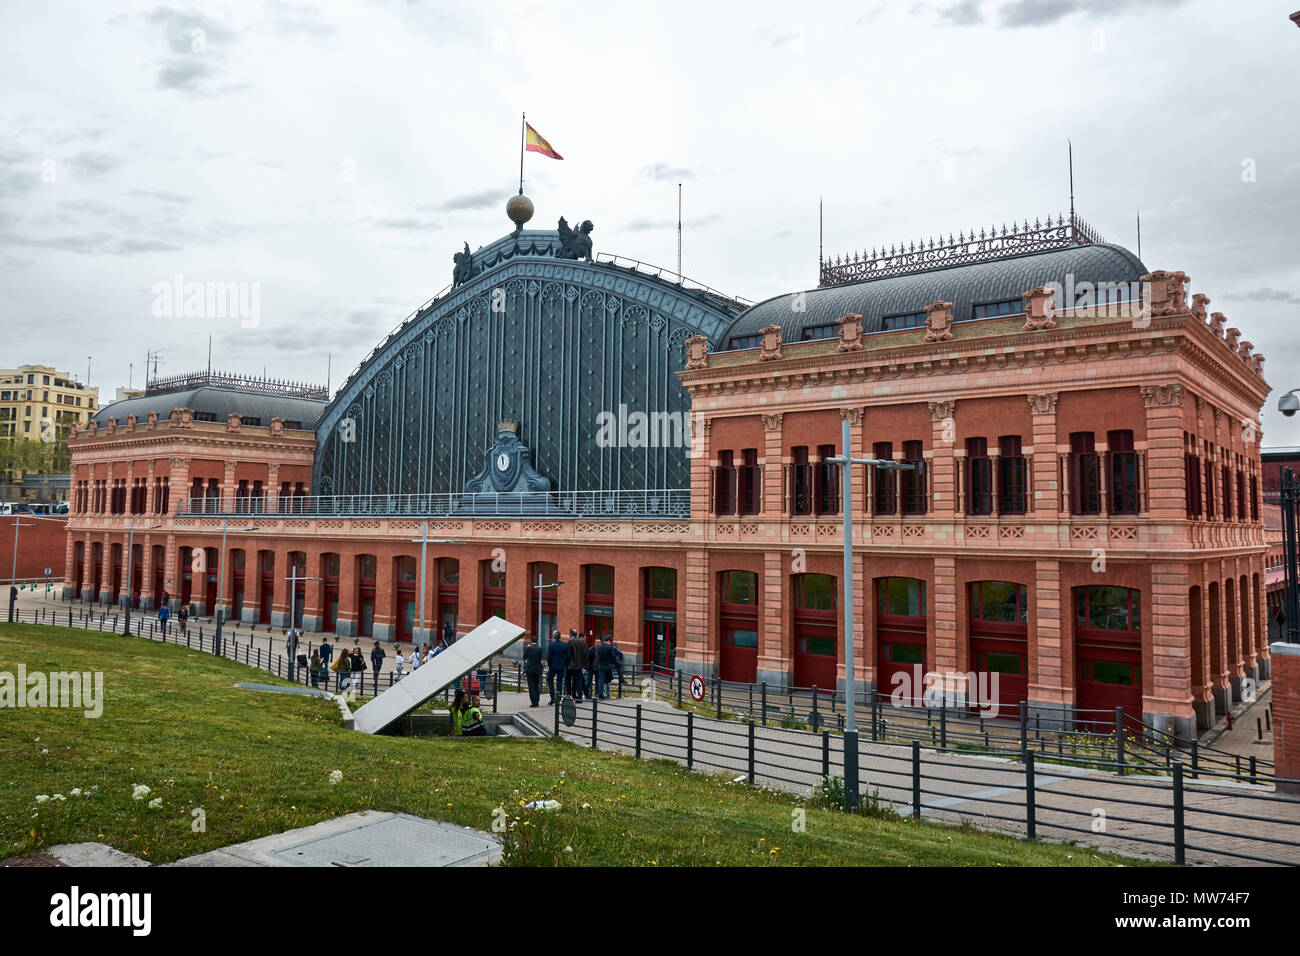 MADRID, SPAIN - APRIL 23, 2018: The facade of the Puerta de Atocha railway station in Madrid, Spain. Stock Photo